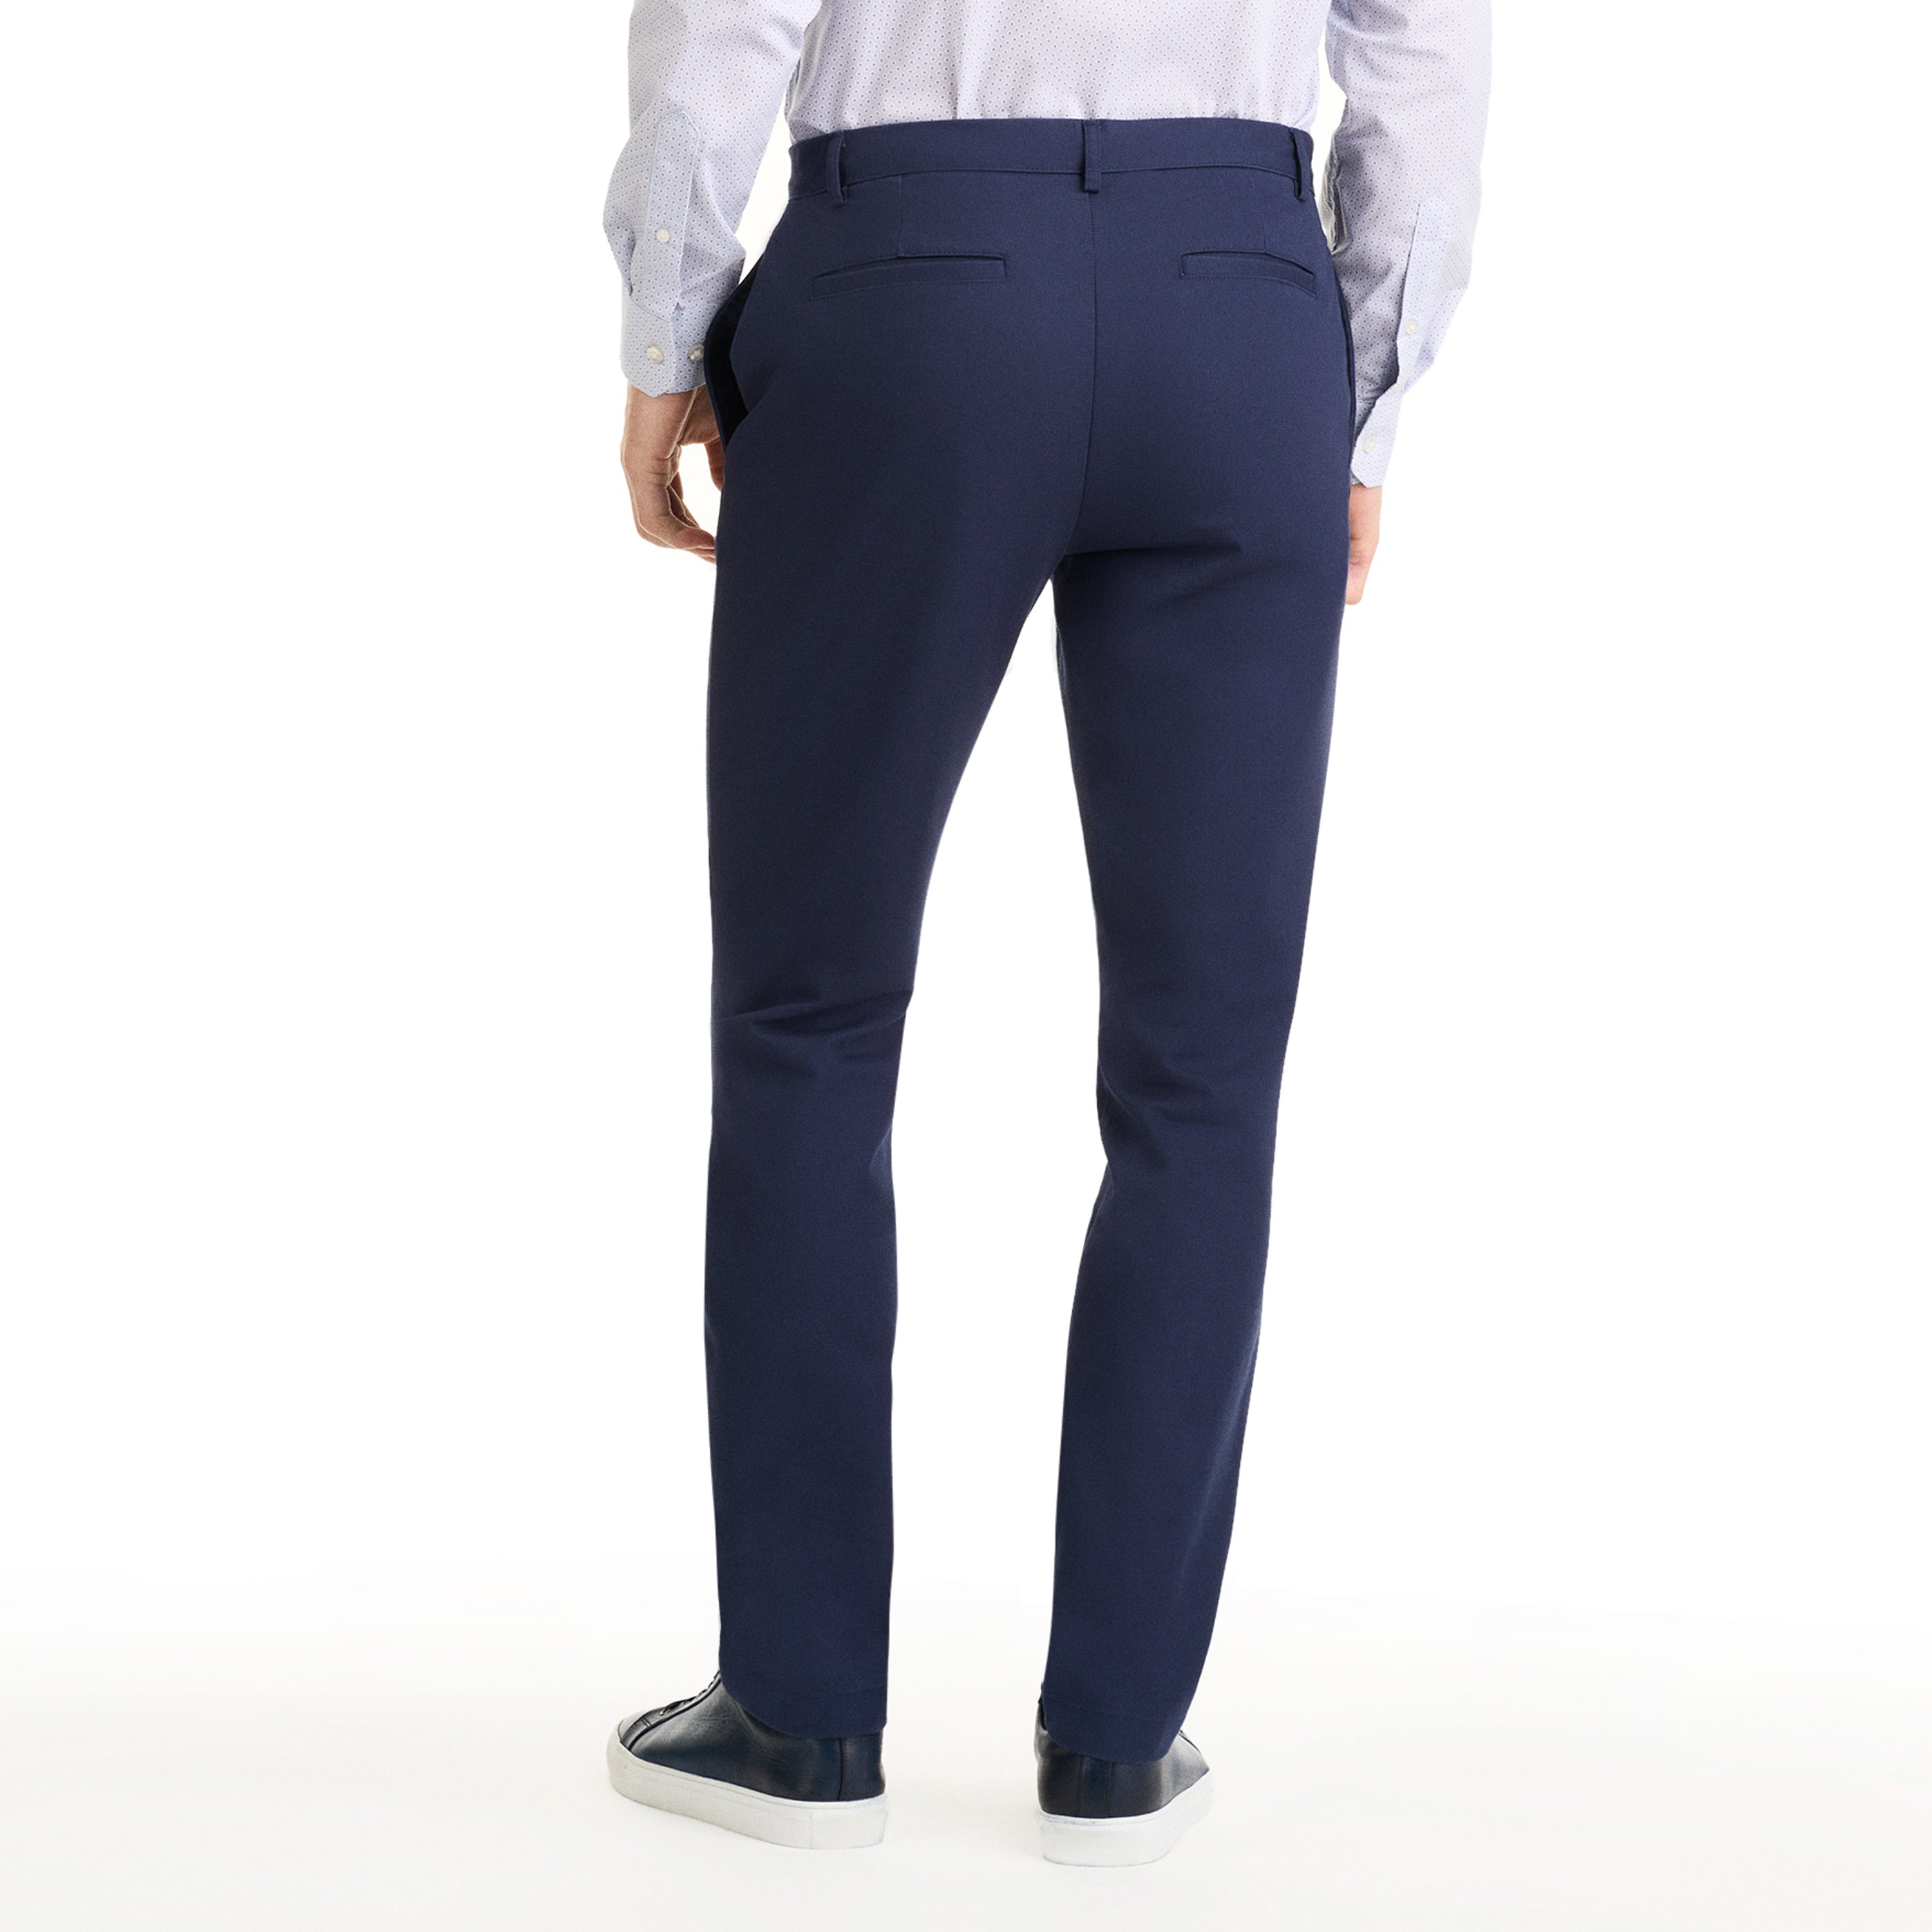 Essential Wrinkle Free Flat Front Straight Leg Pant - Blue